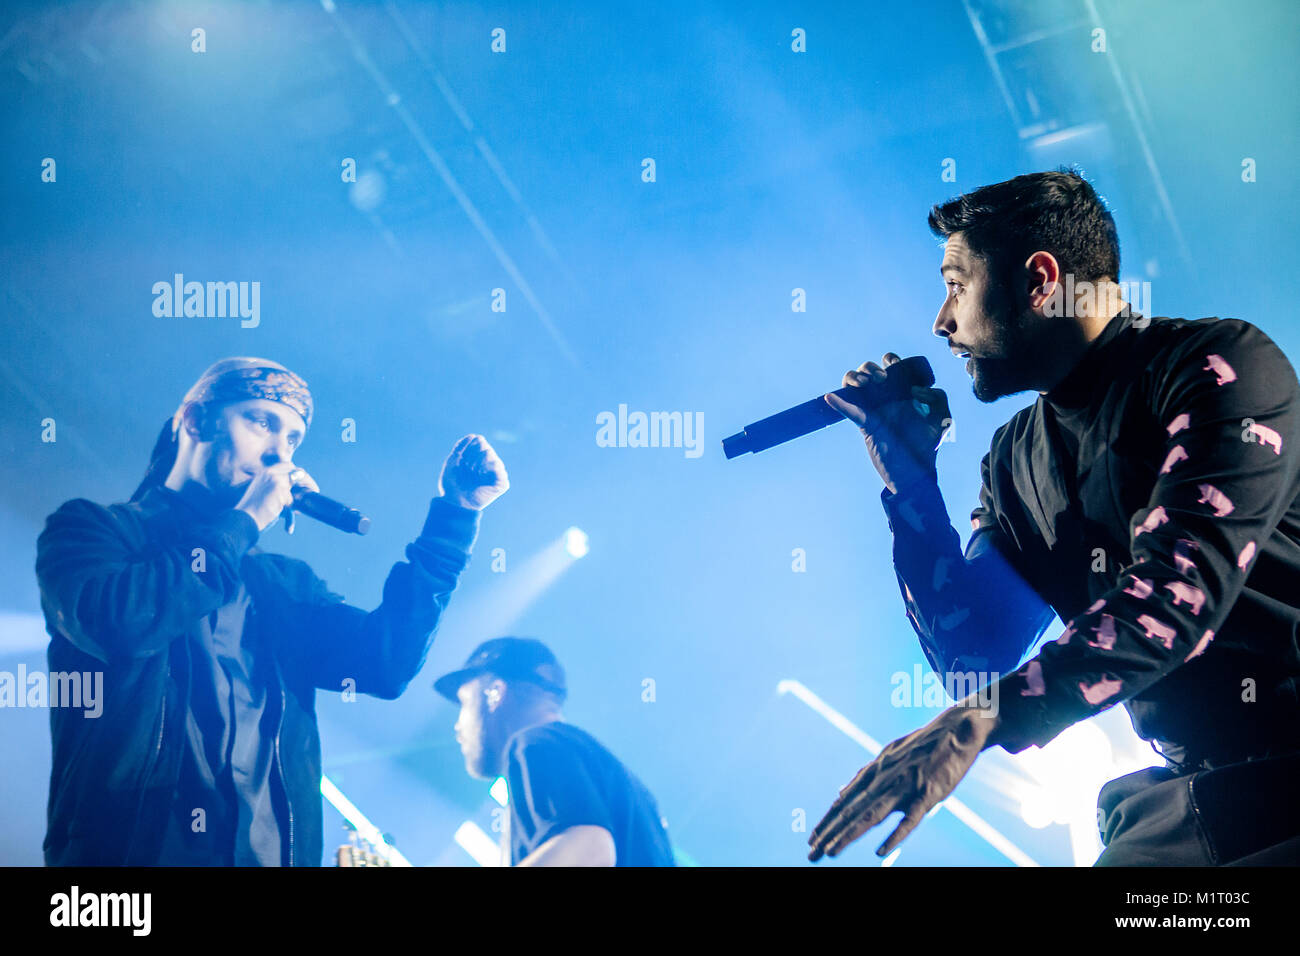 The Norwegian rap group Karpe Diem performs a live concert at the Norwegian music festival UKEN 2016 in Bergen. The duo consists of the two rappers Magdi Omar Ytreeide Abdelmaguid (L) and Chirag Rashmikant Patel (R). Norway, 05/03 2016. Stock Photo